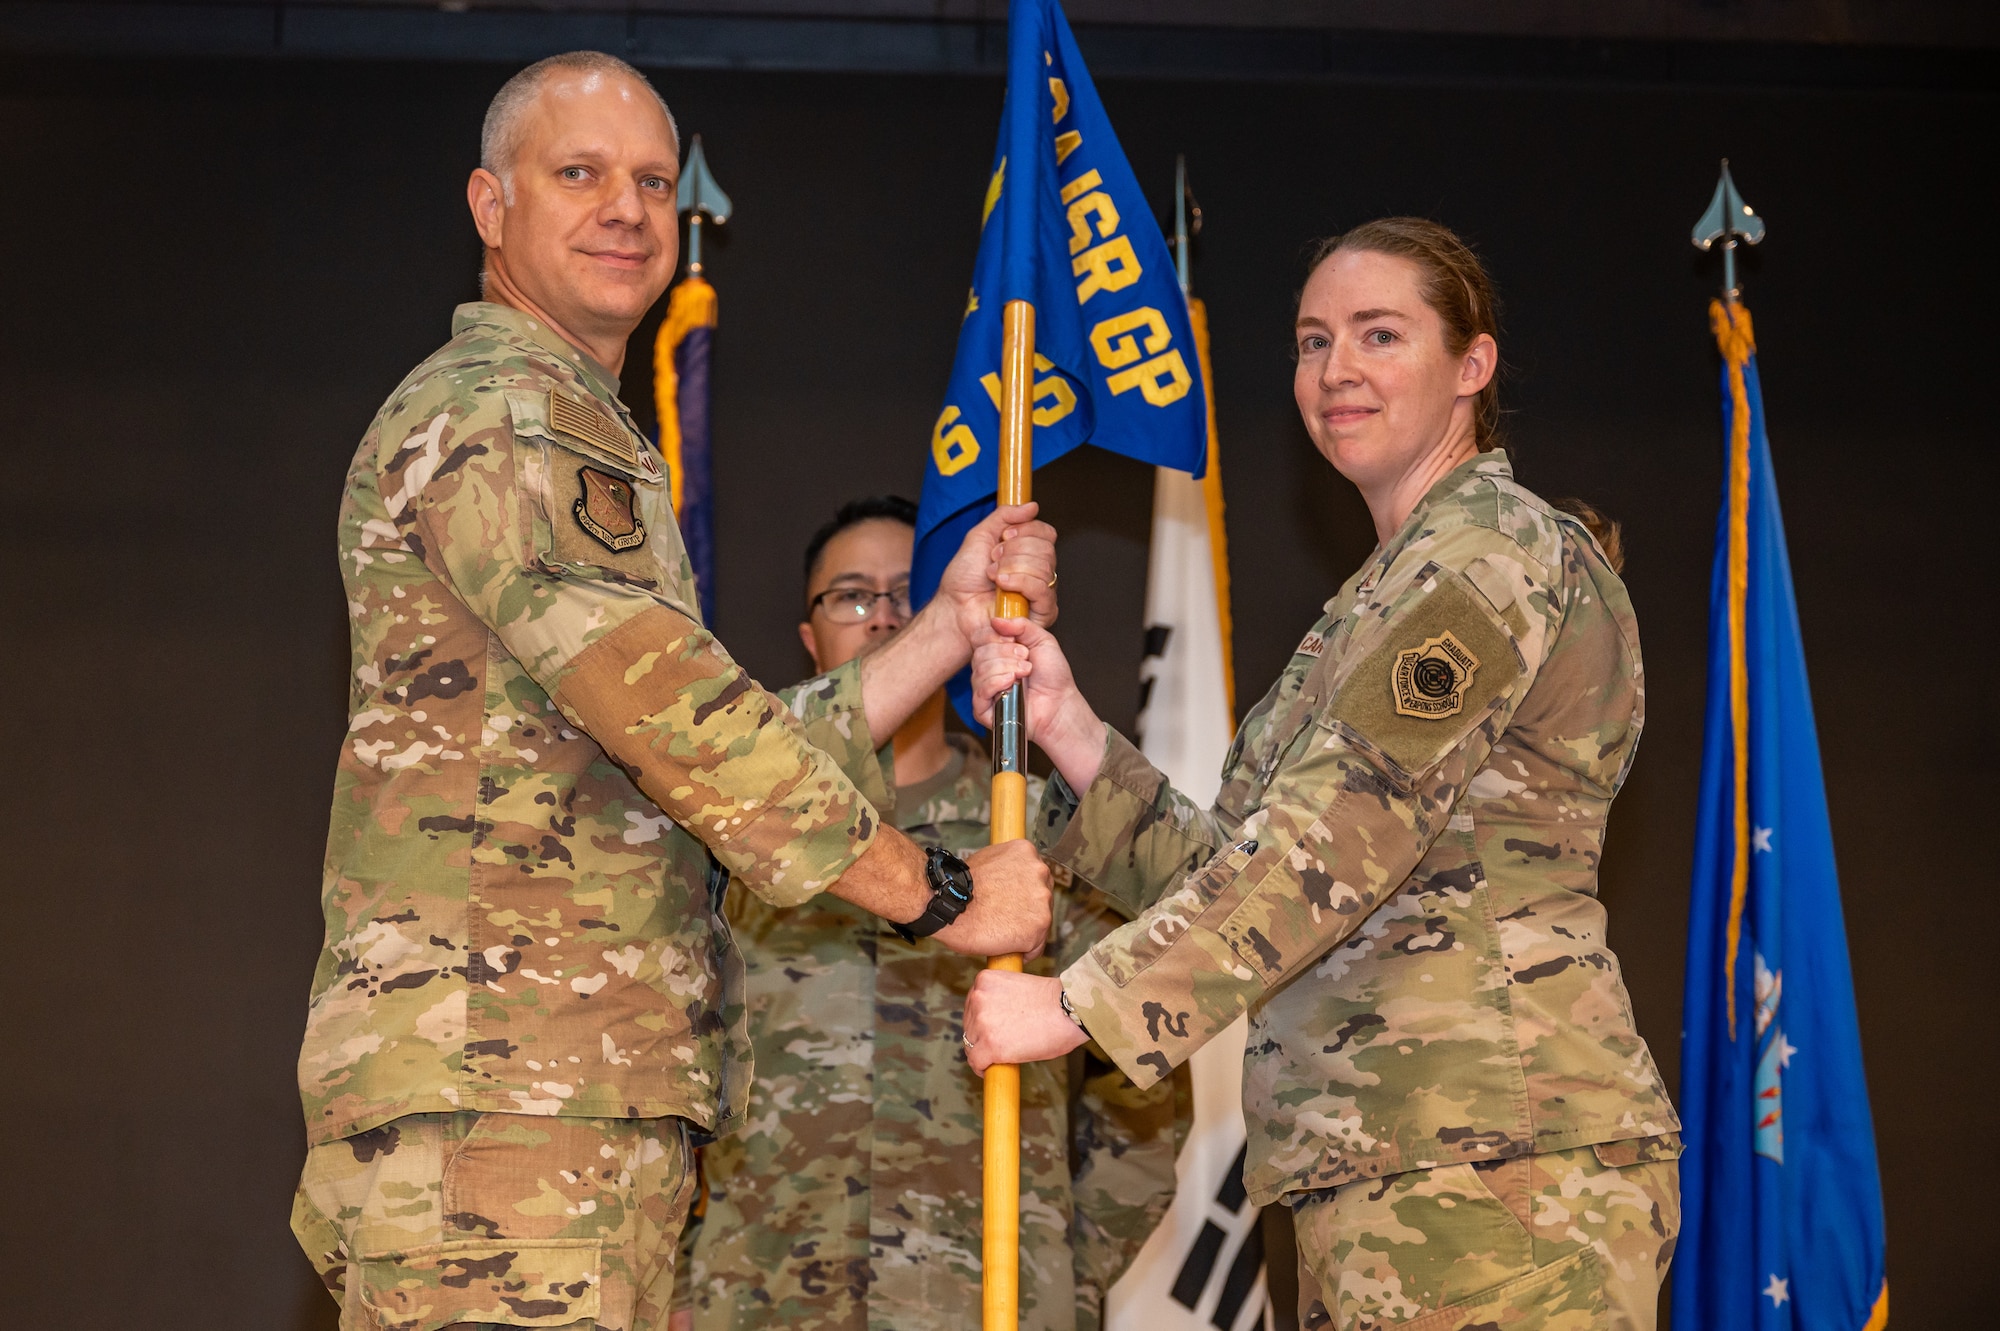 U.S. Air Force Lt. Col. Jarrod Knapp, left, 694th Intelligence, Surveillance, and Reconnaissance group deputy commander, receives the guidon from Lt. Col. Laura Carter, right, 6th Intelligence Squadron outgoing commander, at Osan Air Base, Republic of Korea, June 14, 2023. In a change of command ceremony, the guidon symbolizes the transfer of command and the authority and responsibility associated with it. (U.S. Air Force photo by Senior Airman Thomas Sjoberg)